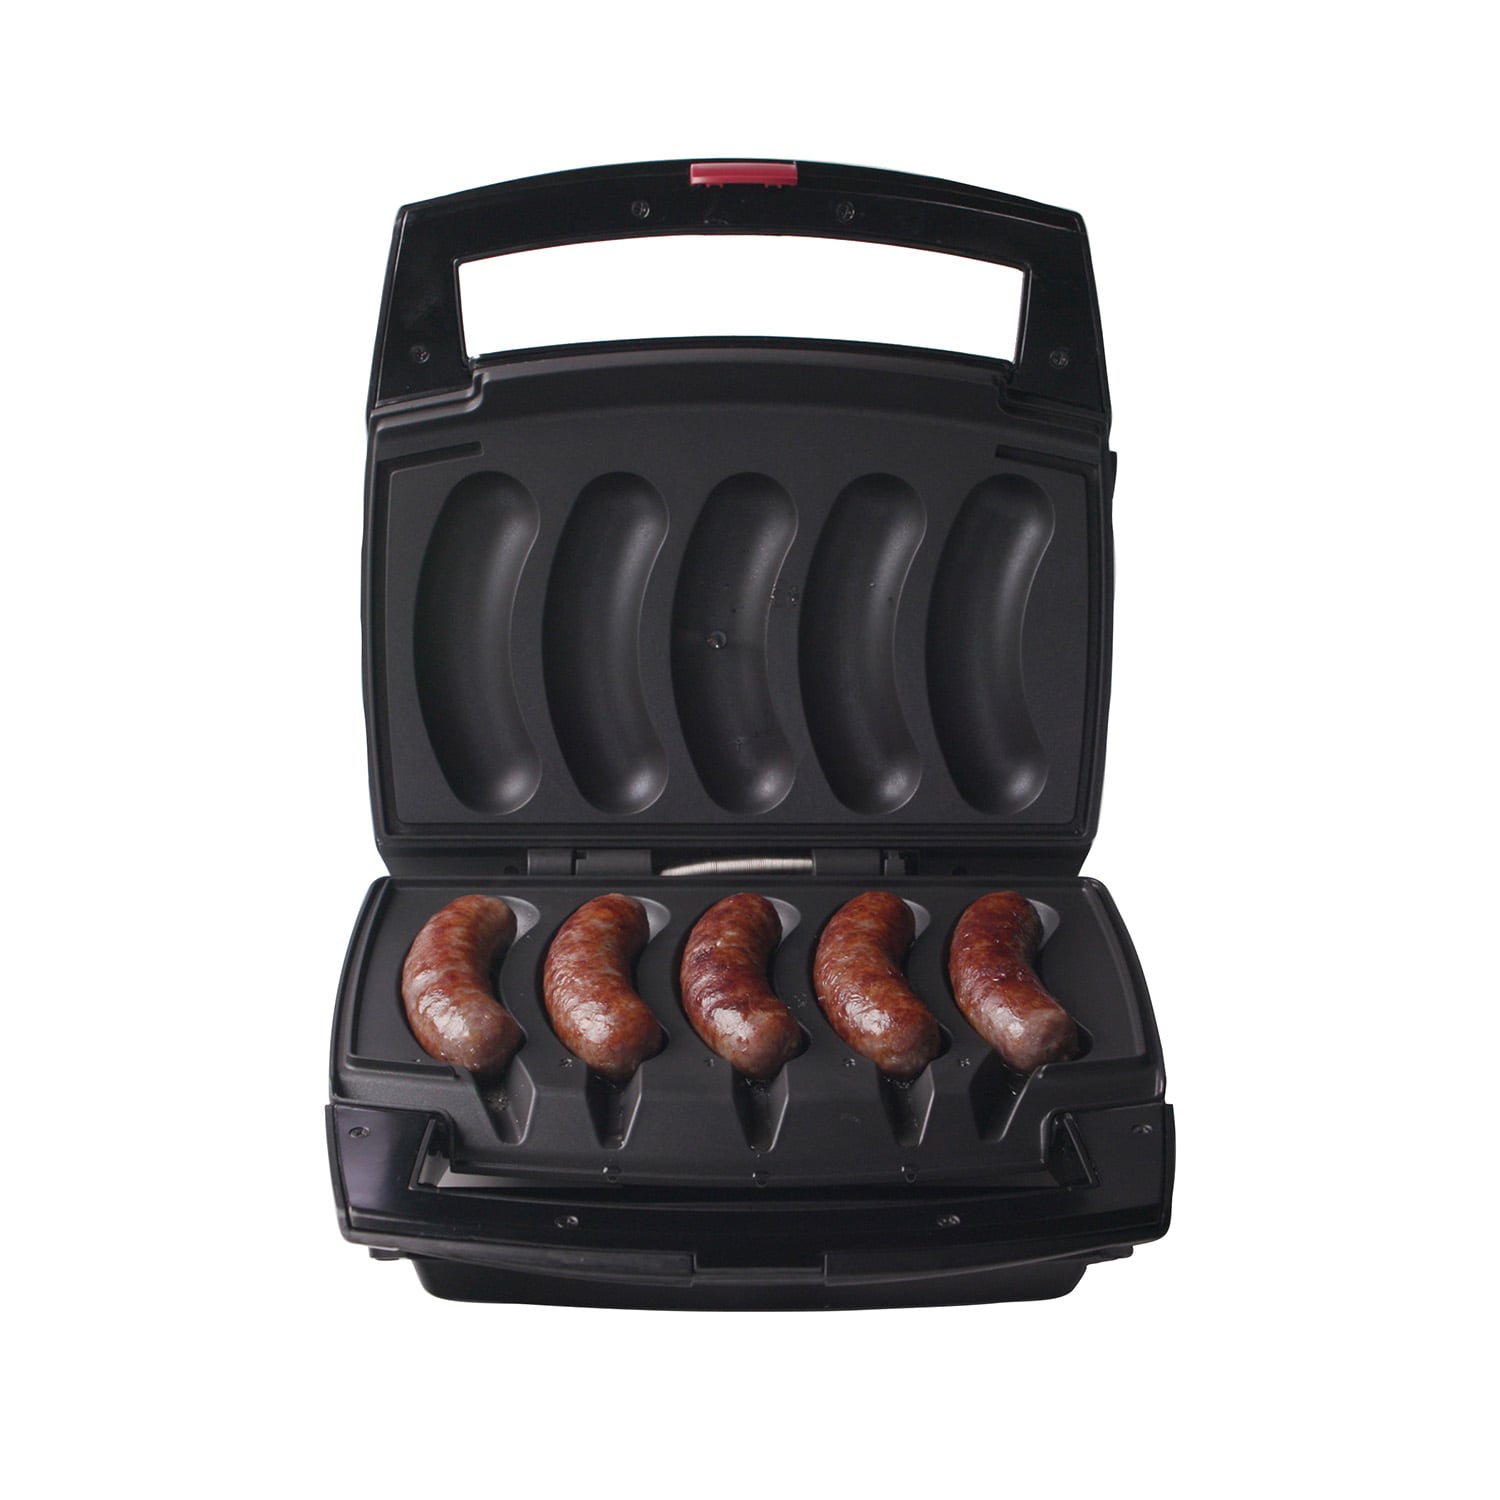 Sizzling Sausage 3-in-1 Black Indoor Electric Grill with Removable Plates 